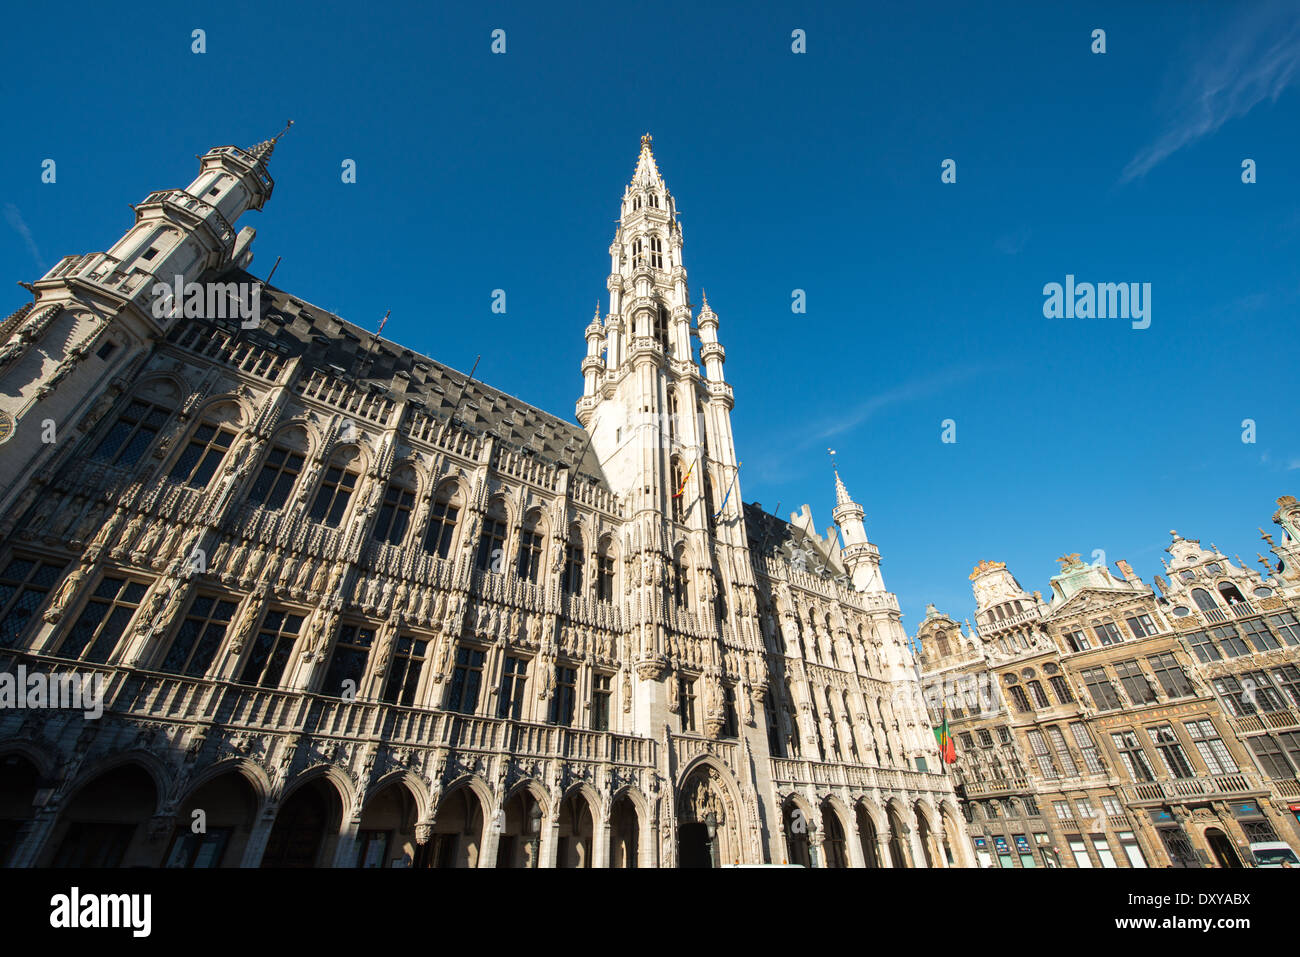 on Grand Place (La Grand-Place), a UNESCO World Heritage Site in central Brussels, Belgium. Lined with ornate, historic buildings, the cobblestone square is the primary tourist attraction in Brussels. Stock Photo